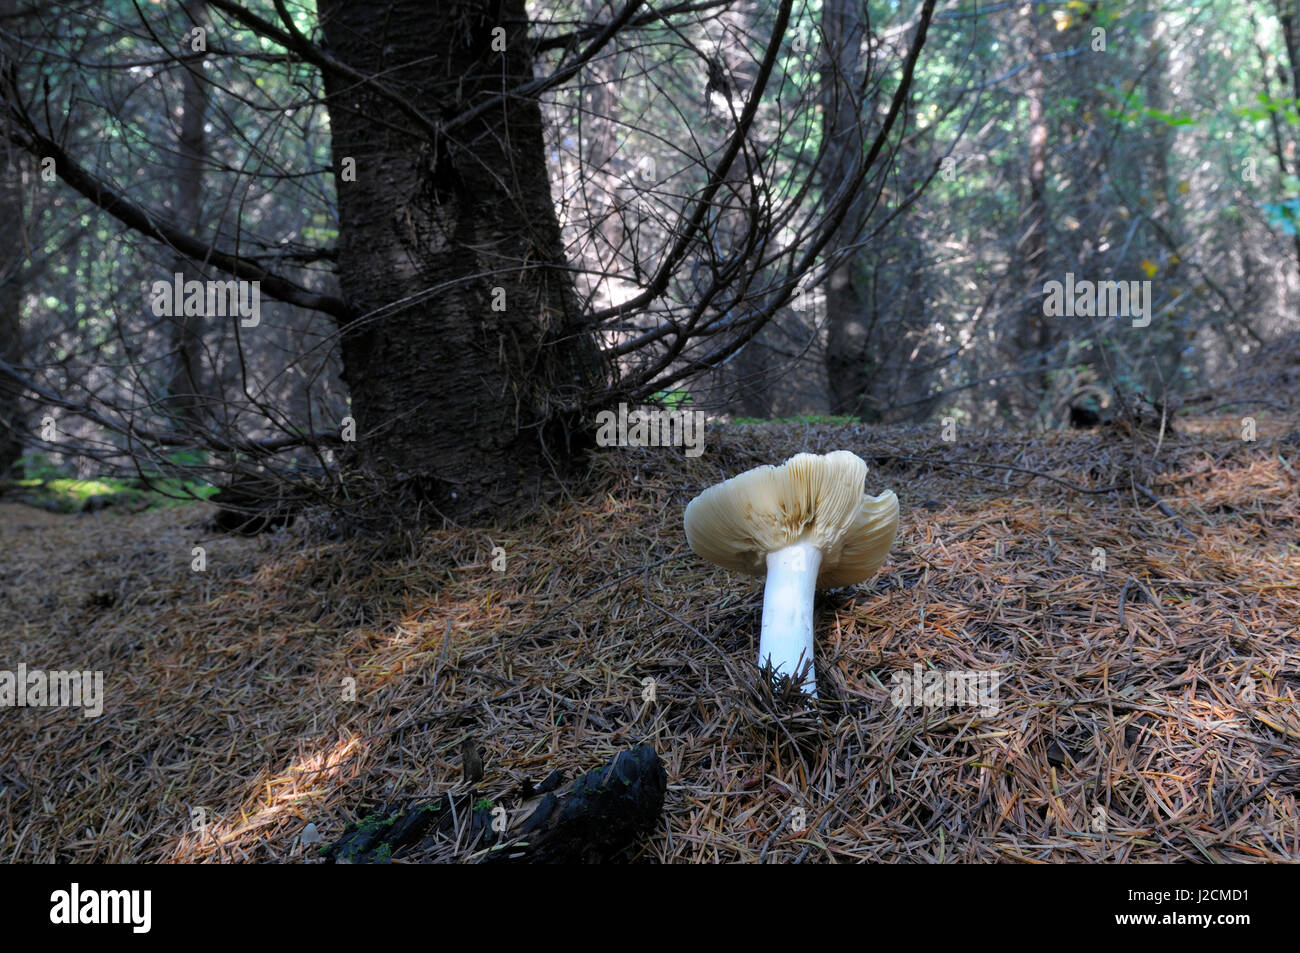 Canada, British Columbia, Vancouver Island. Russula mushroom growing in a dark forest in pine needles Stock Photo